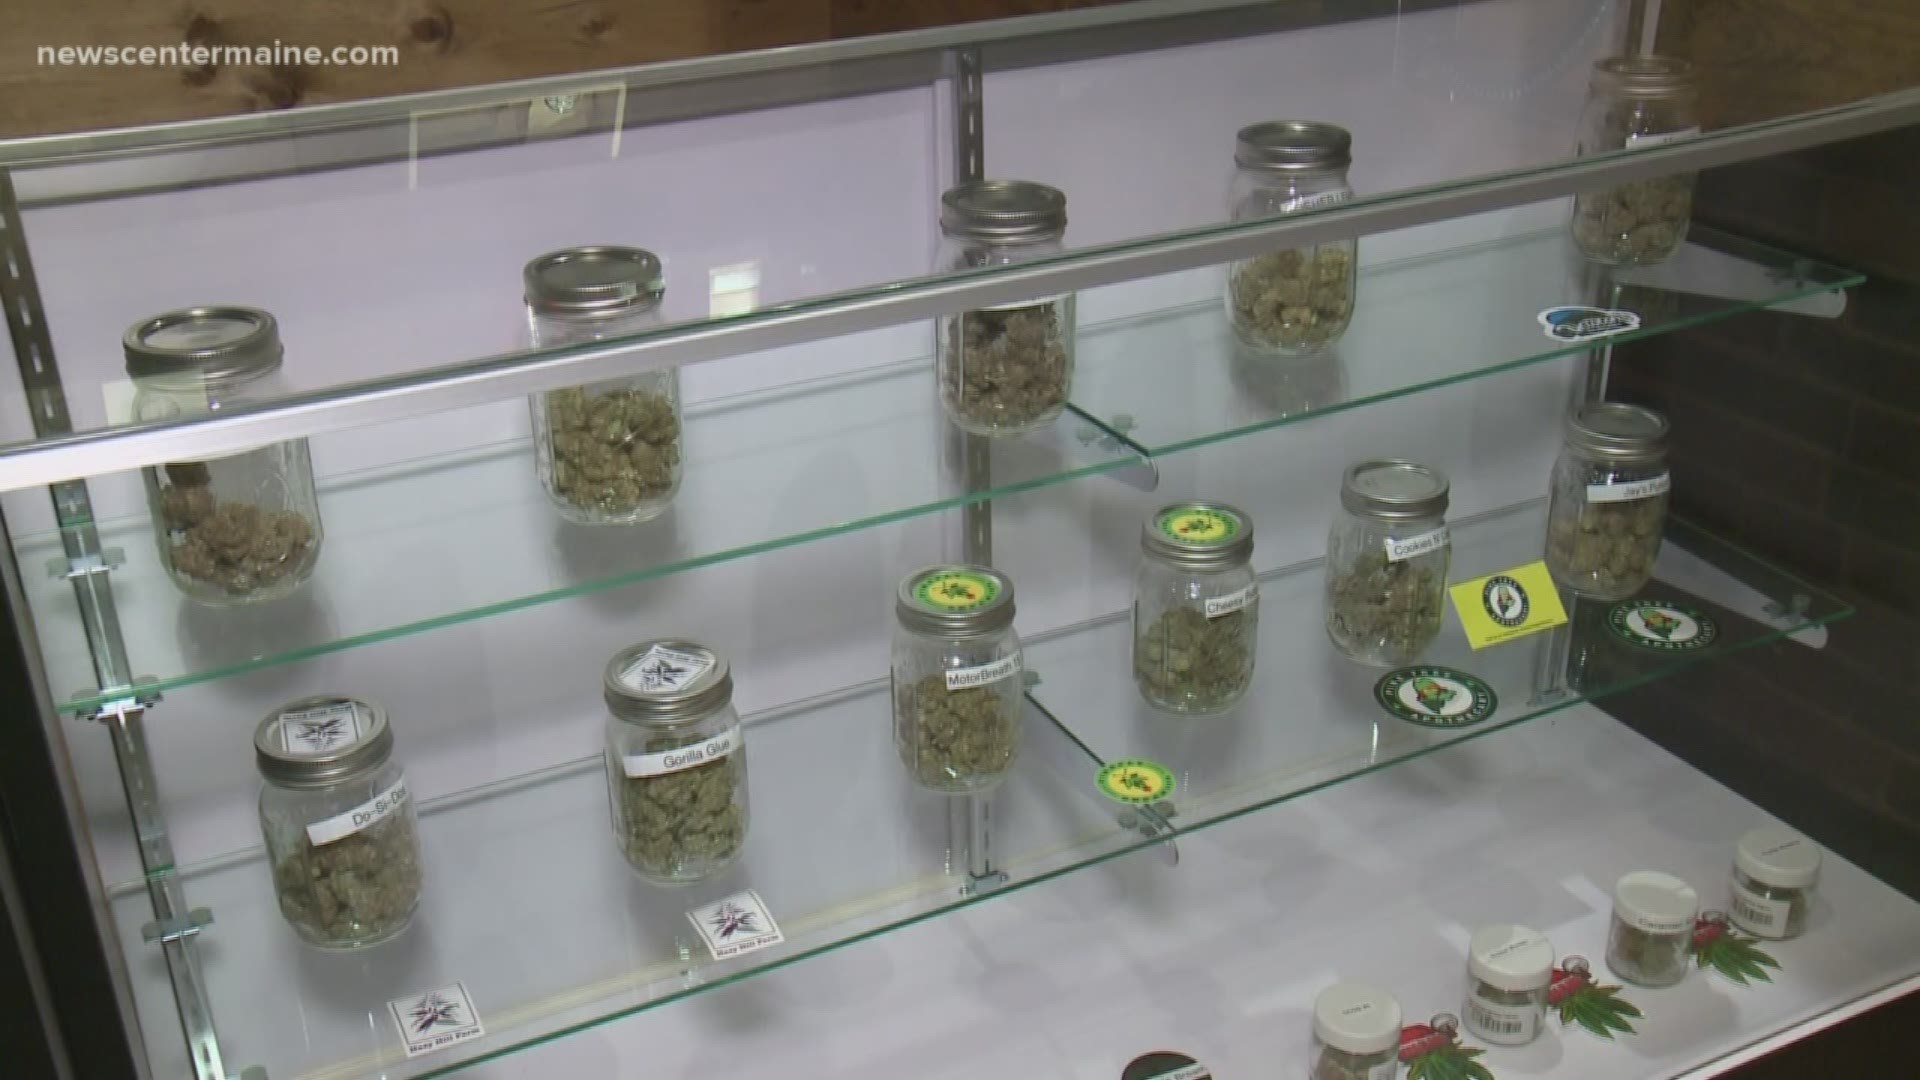 Portland leaders are meeting Tuesday night to discuss retail marijuana rules in the city, including allowing only 20 shops, banning mobile delivery services, and establishing an annual fee of $10,000.